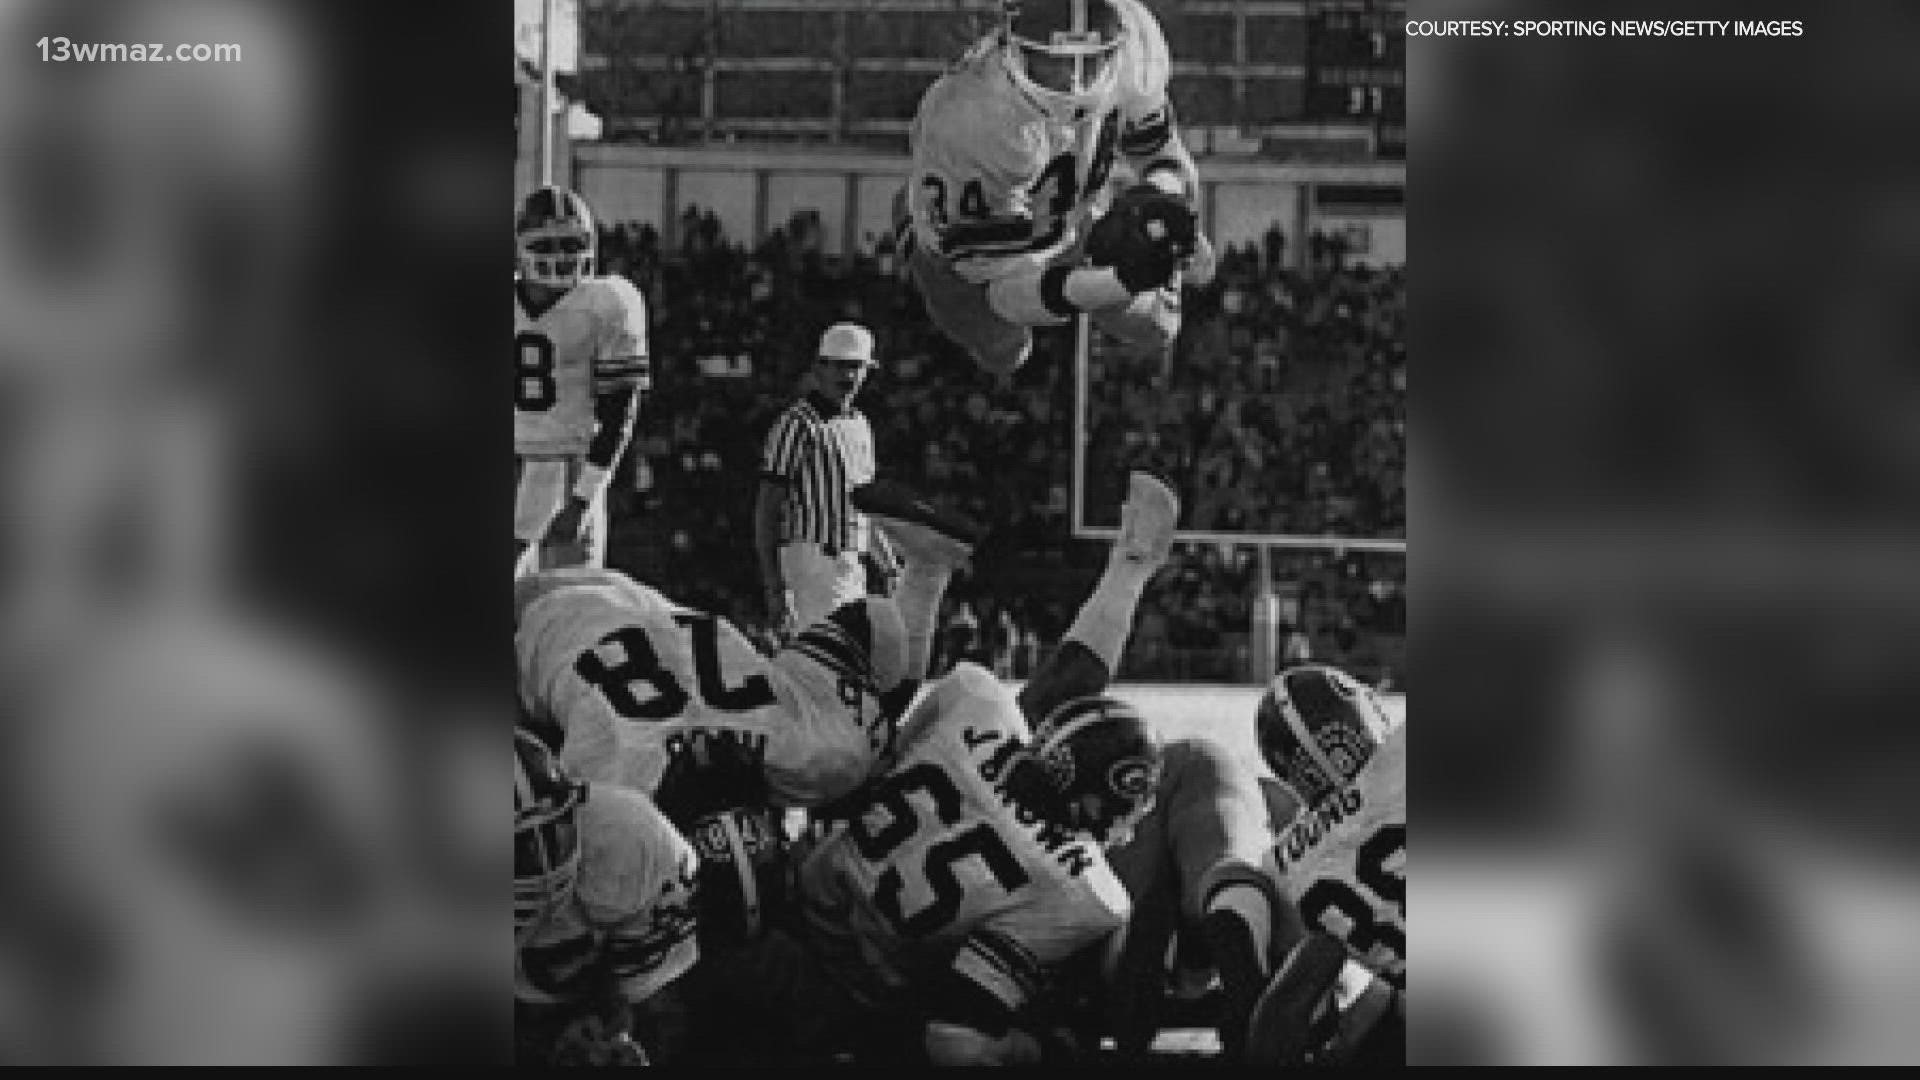 If you go back to 1980, the last time Georgia won it all, Vince Dooley was at the helm. Wrightsville's Herschel Walker led the Dawgs on a perfect 12-0 run